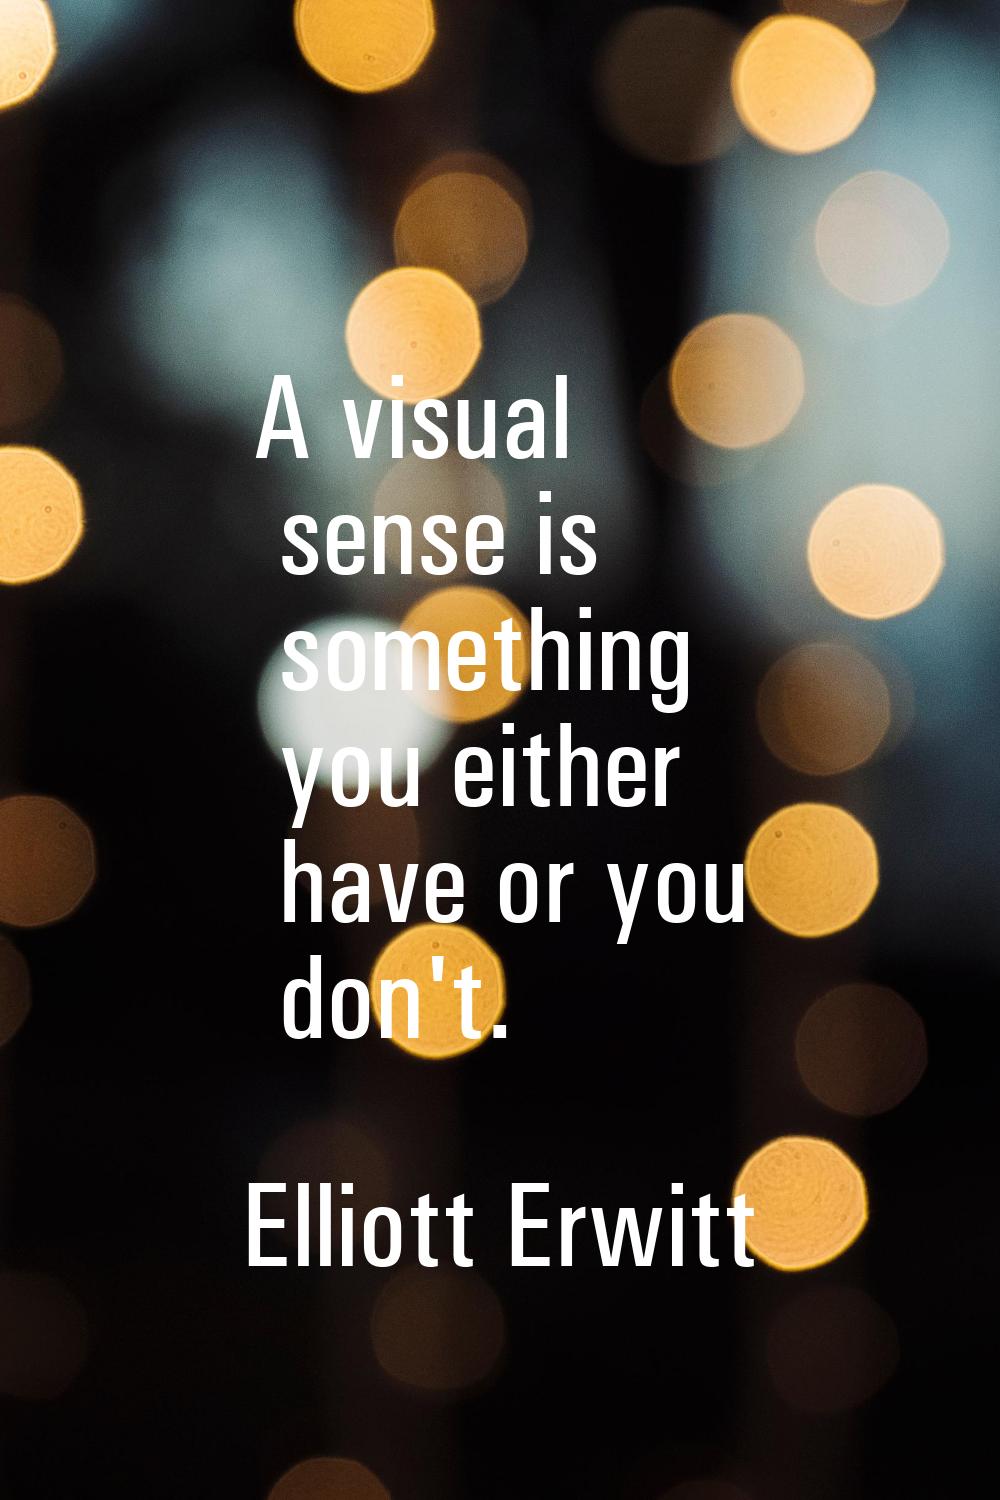 A visual sense is something you either have or you don't.